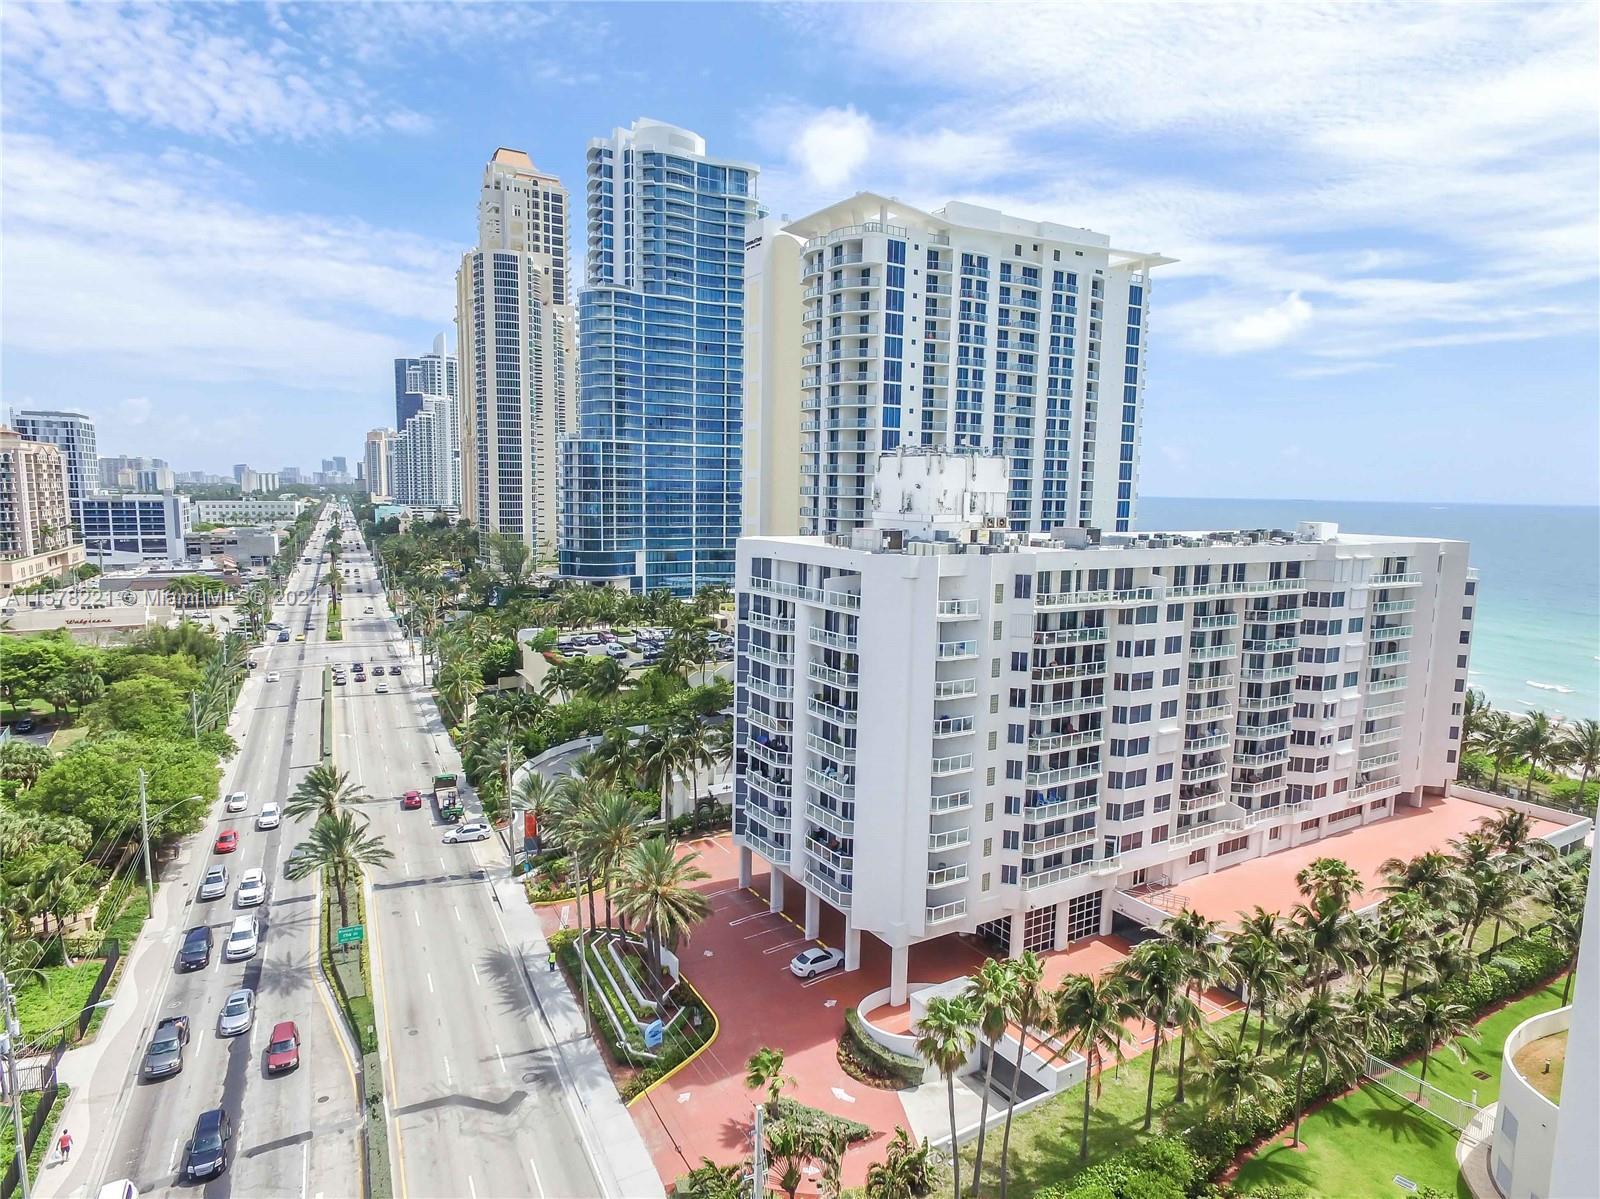 Photo of 17275 Collins Ave #705 in Sunny Isles Beach, FL